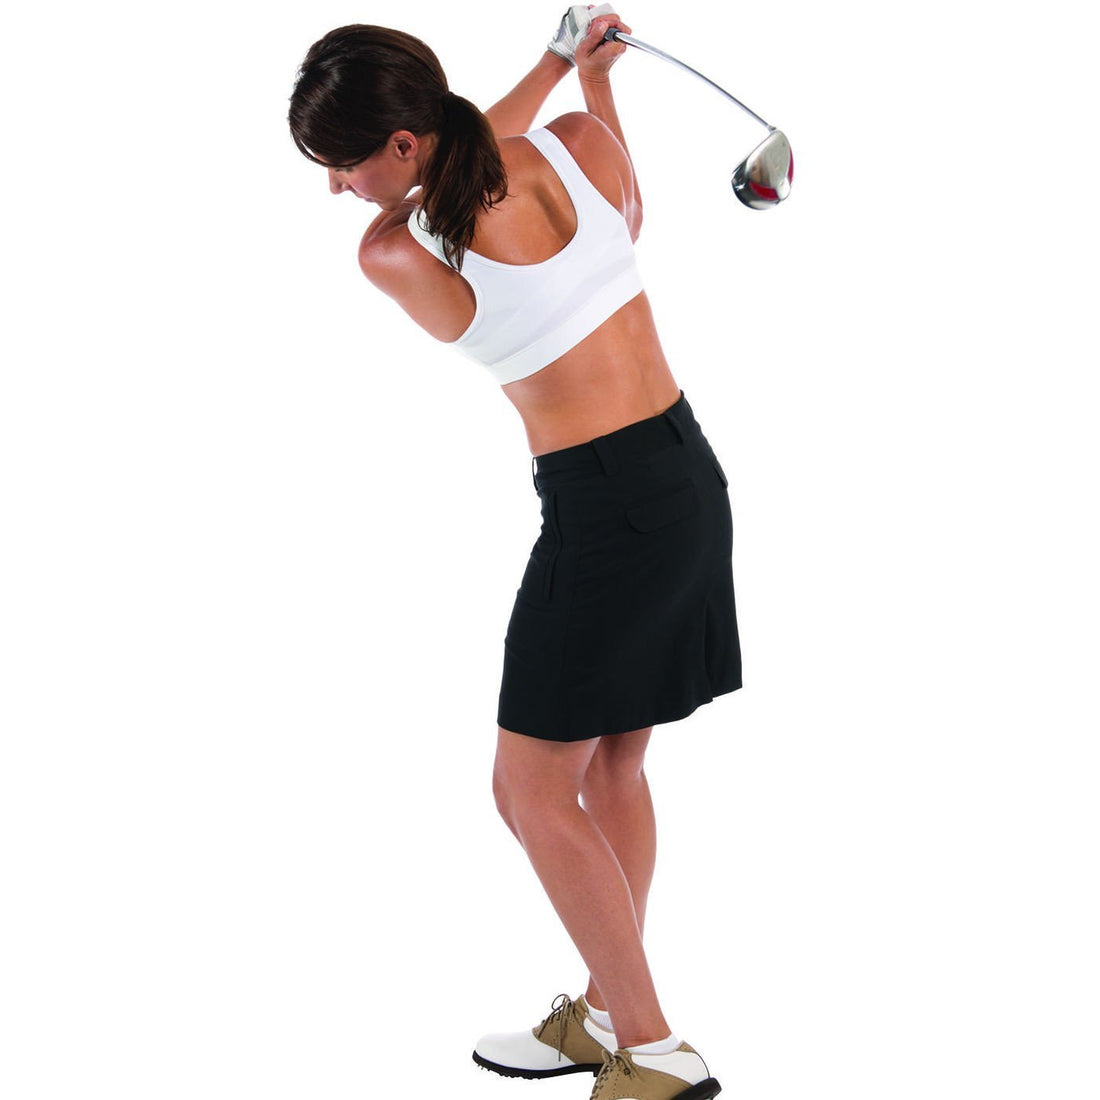 In search of the perfect golf bra